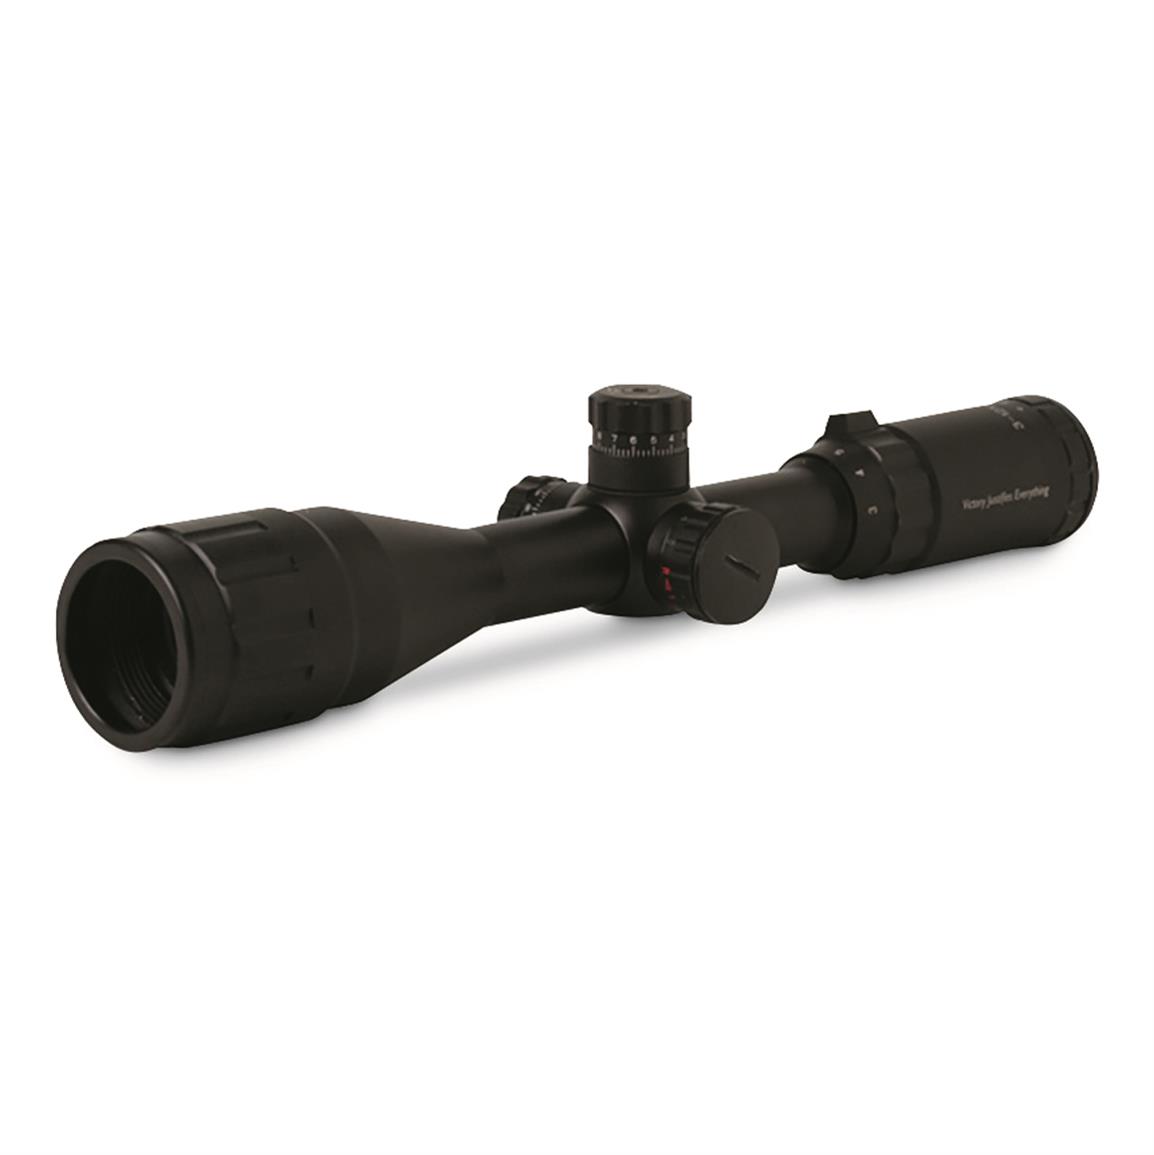 Firefield Tactical 3-12x40mm AO Rifle Scope, Illuminated Mil-dot Reticle